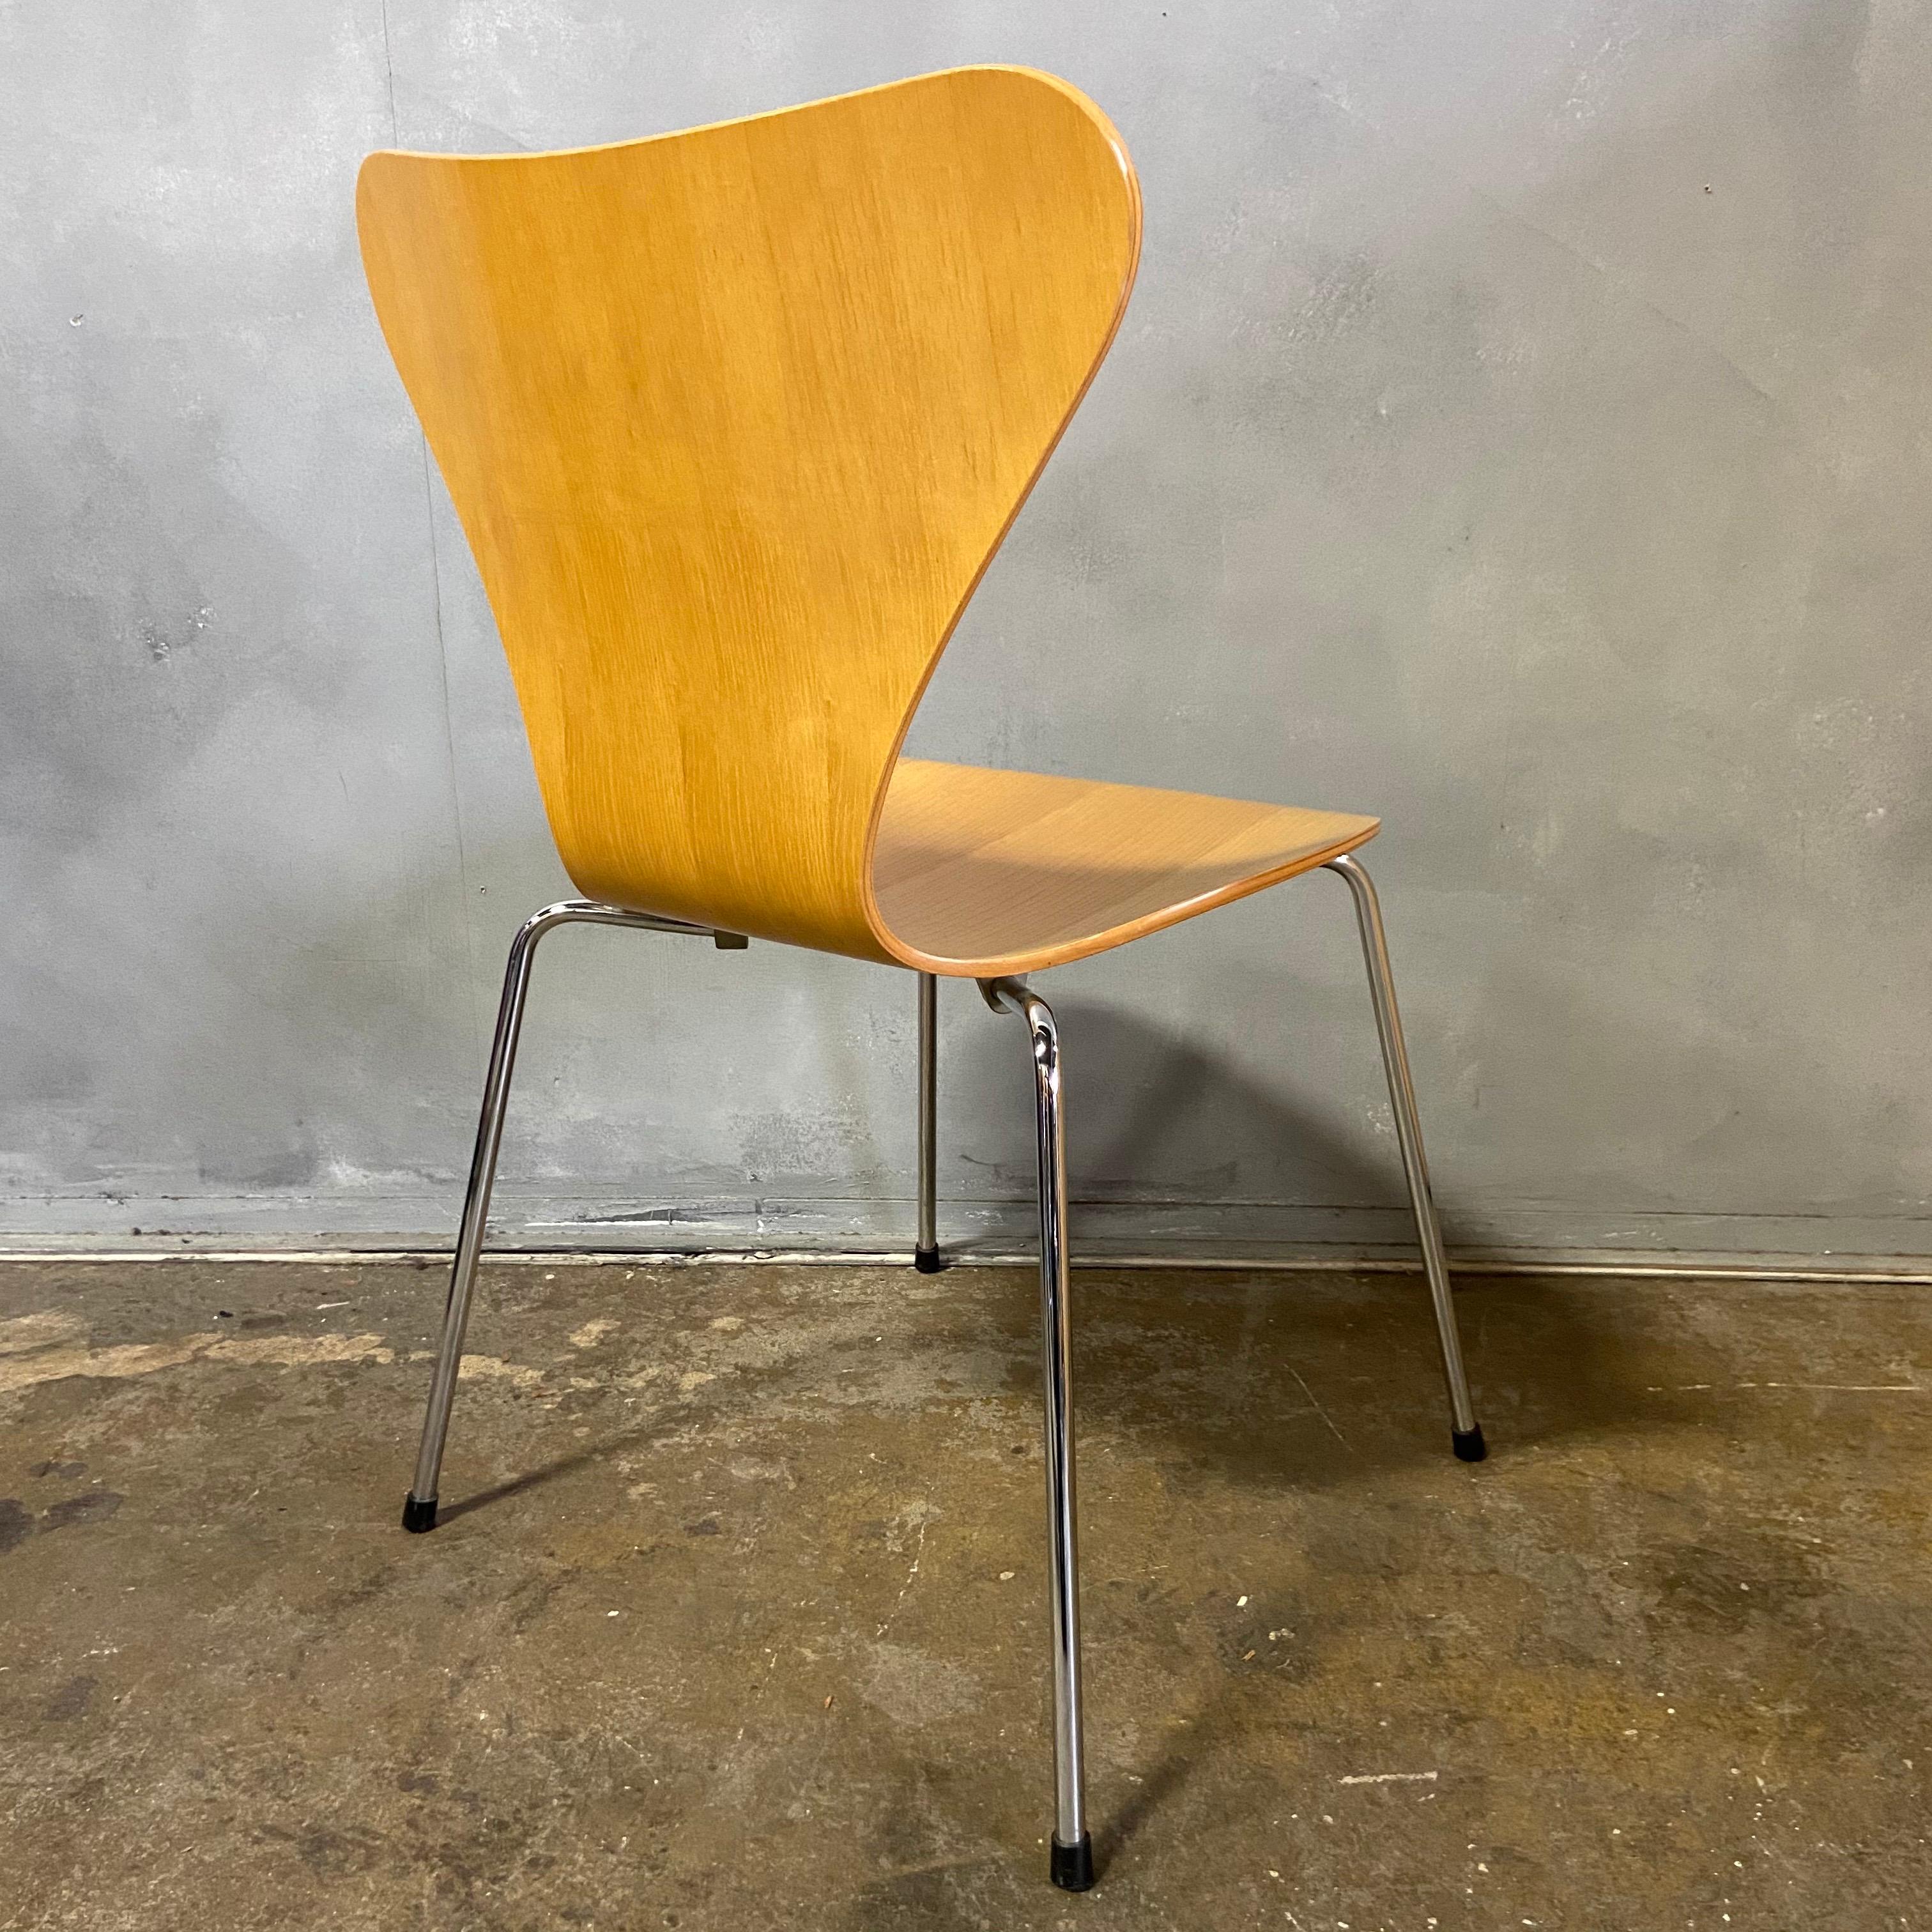 Midcentury Arne Jacobsen Series 7 Chairs In Good Condition For Sale In BROOKLYN, NY